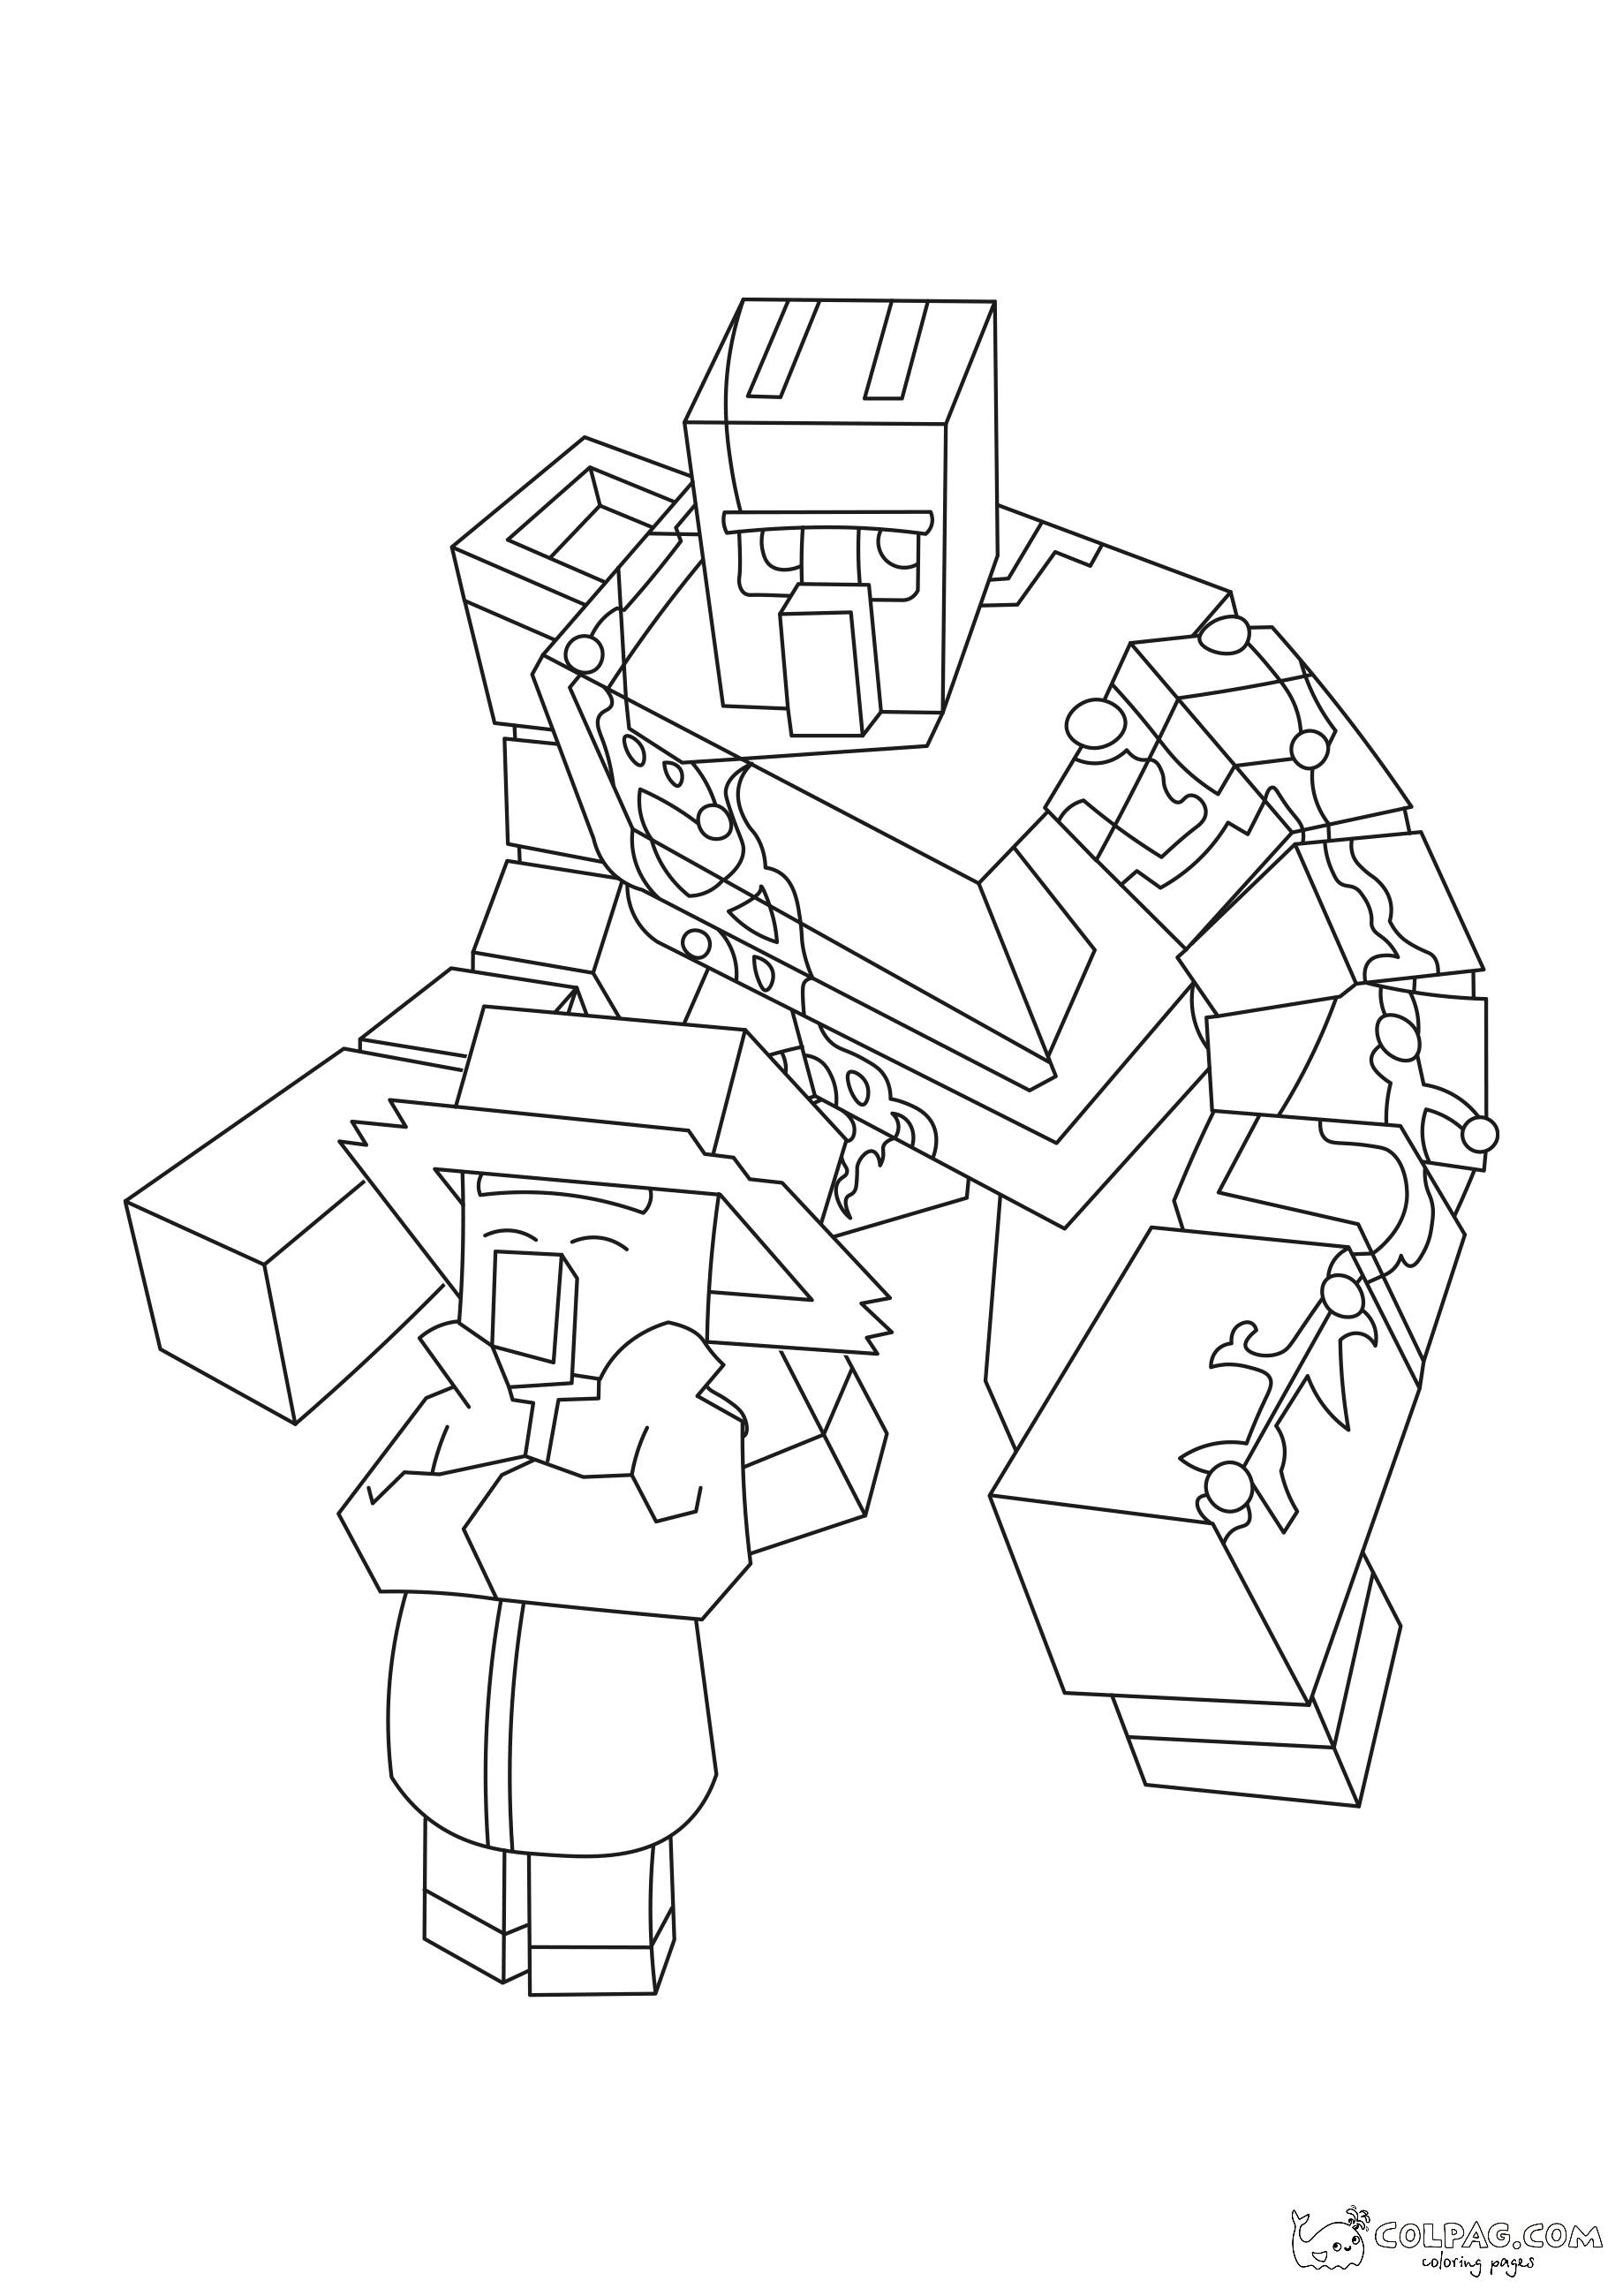 villager-and-iron-golem-minecraft-coloring-page-colpag